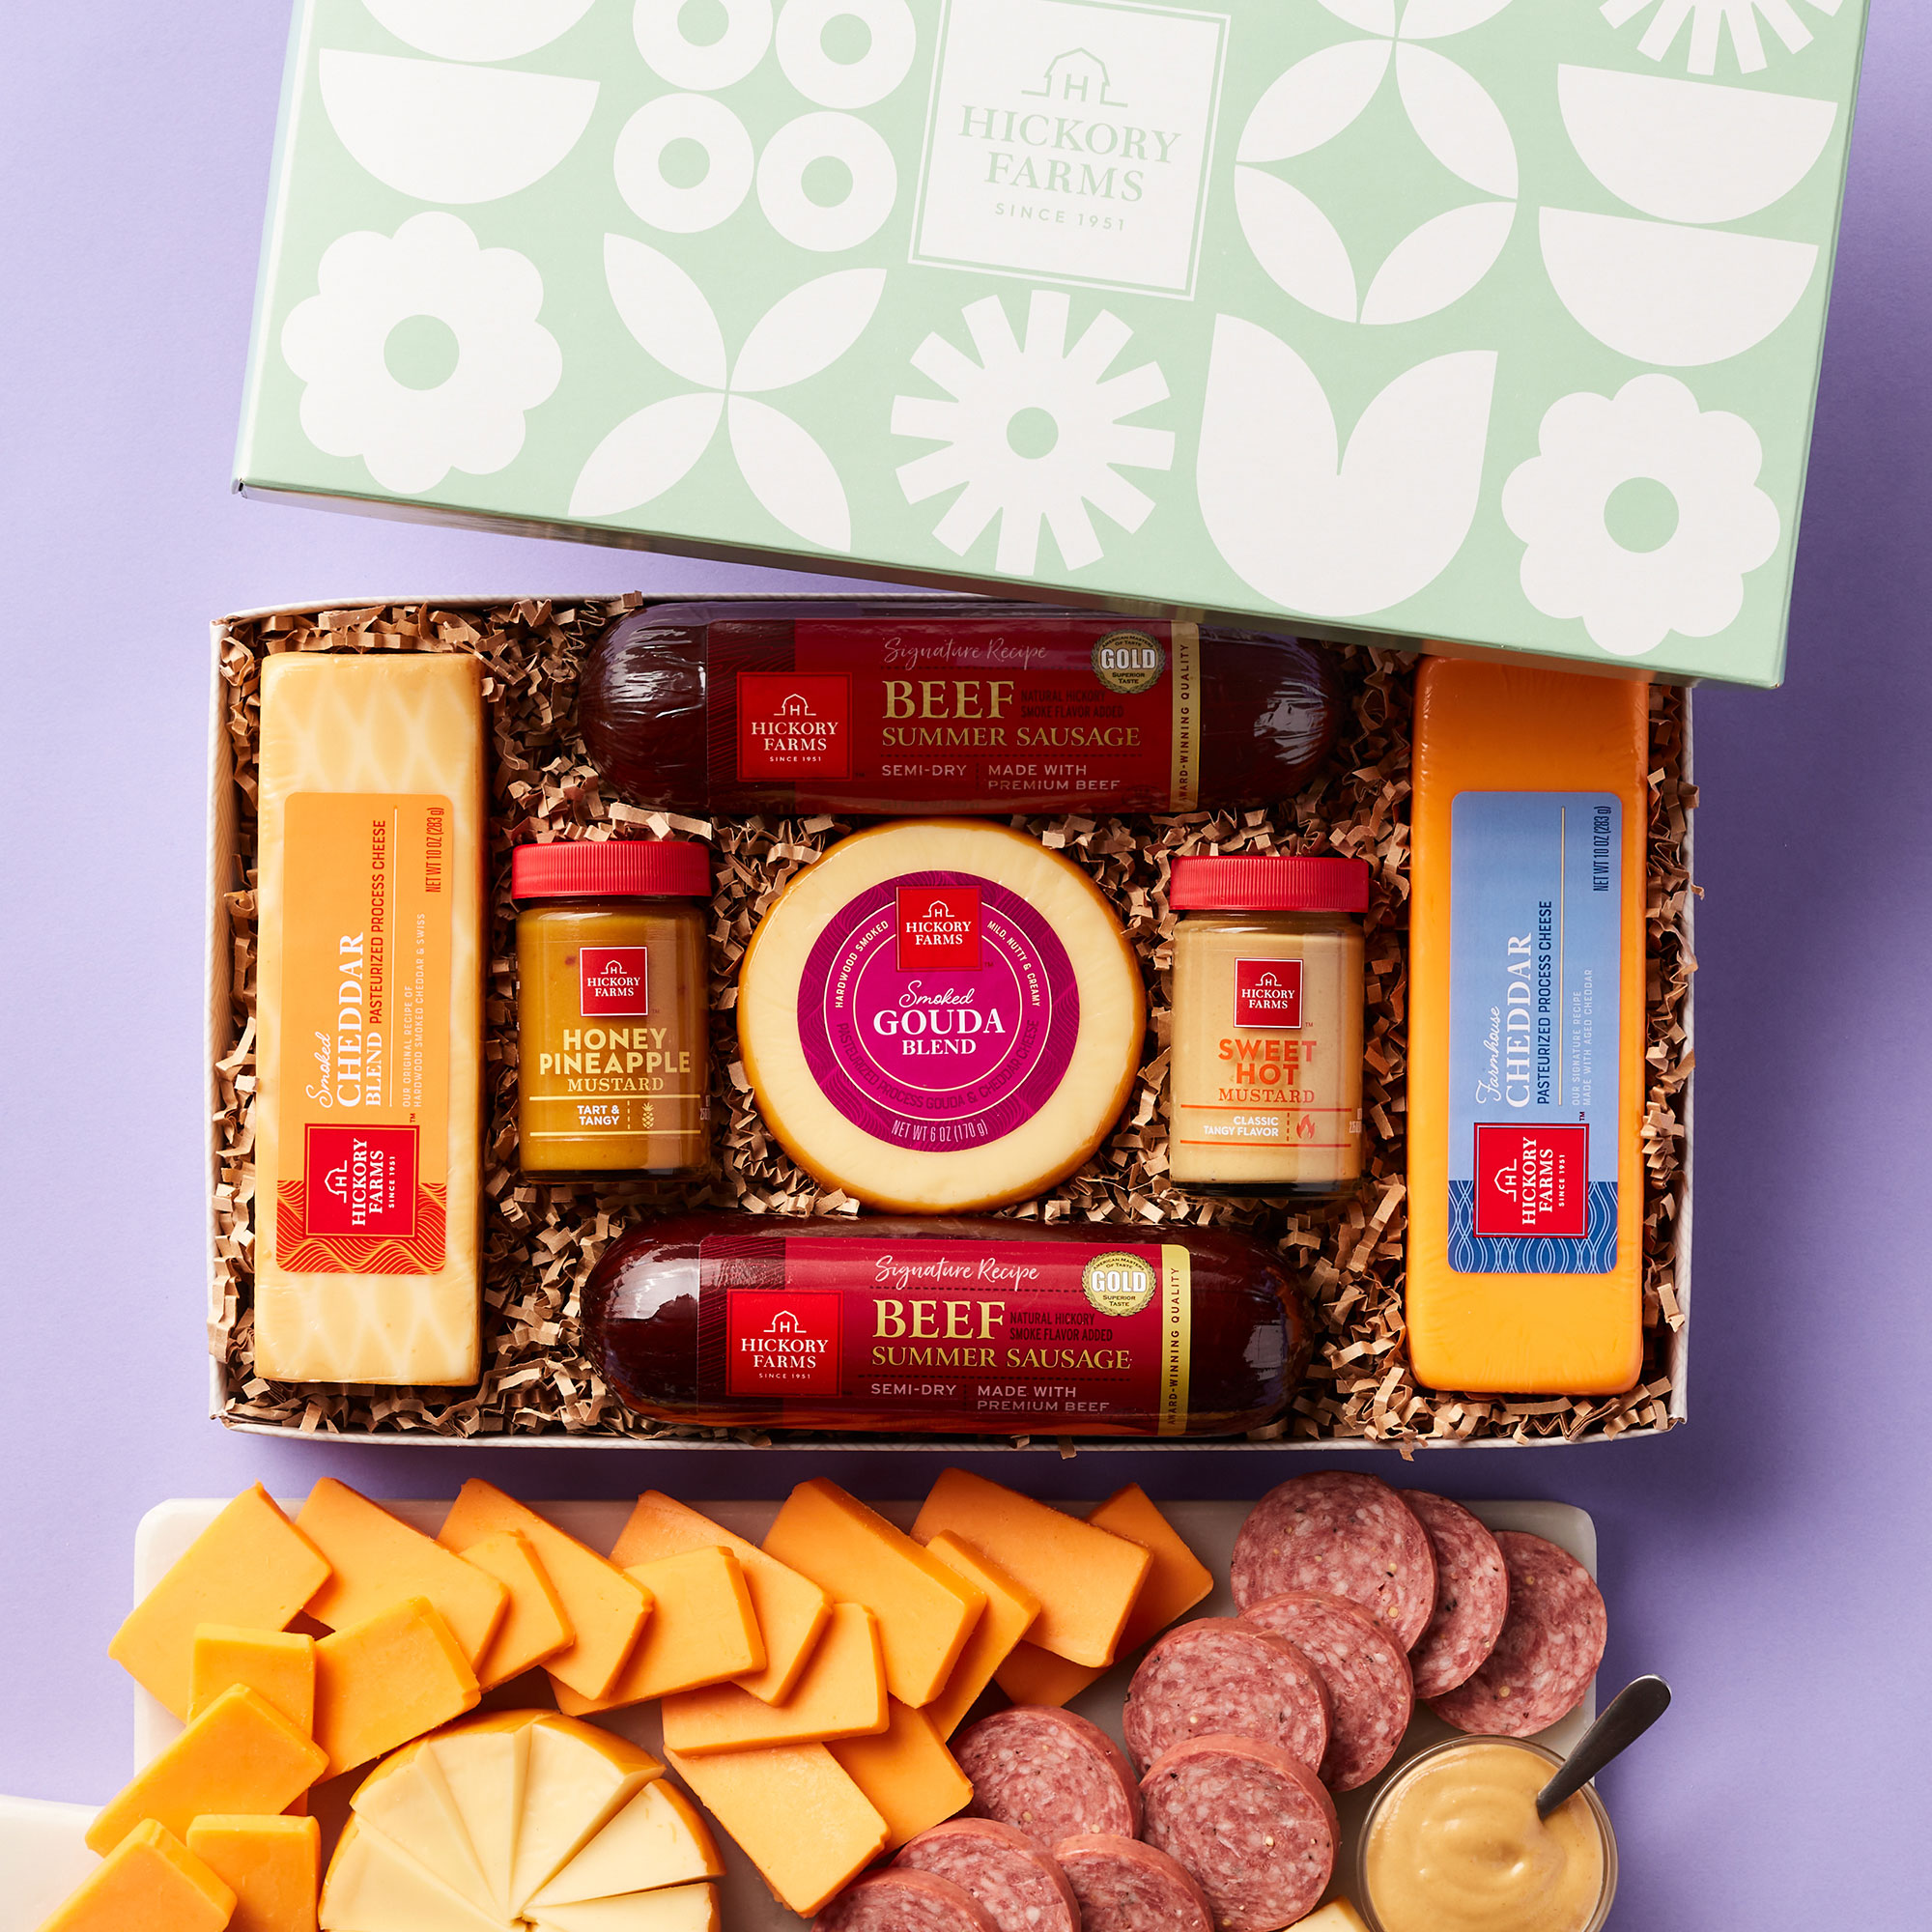 https://www.hickoryfarms.com/on/demandware.static/-/Sites-Web-Master-Catalog/default/dw073d1504/images/products/sunny-summer-sausage-cheese-gift-box-001278-1.jpg